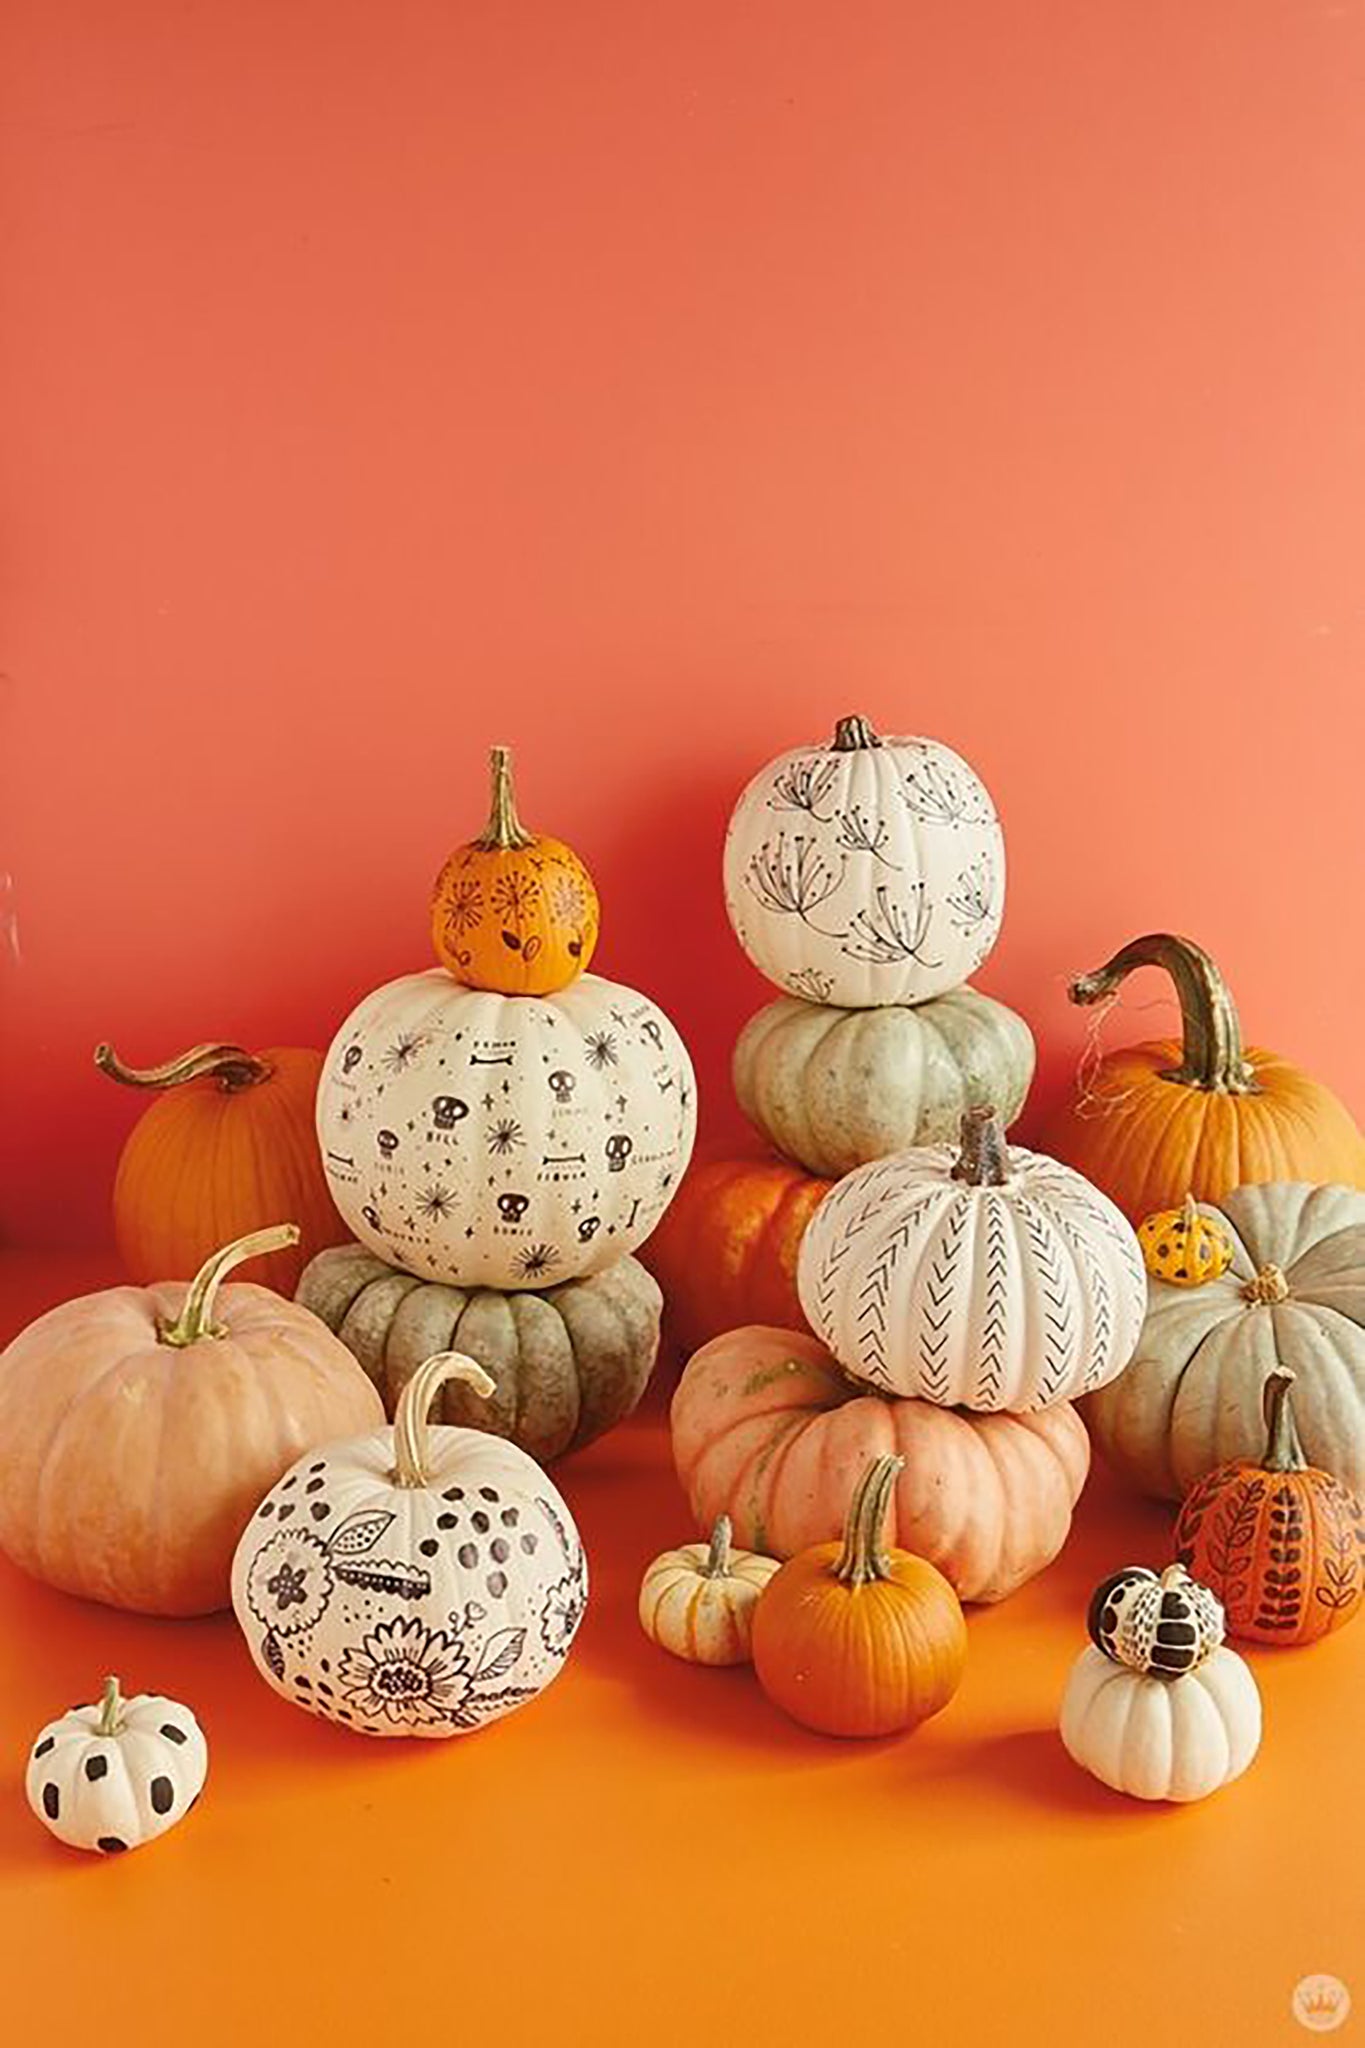 An arrangement of different sized painted pumpkins in front of an orange wall